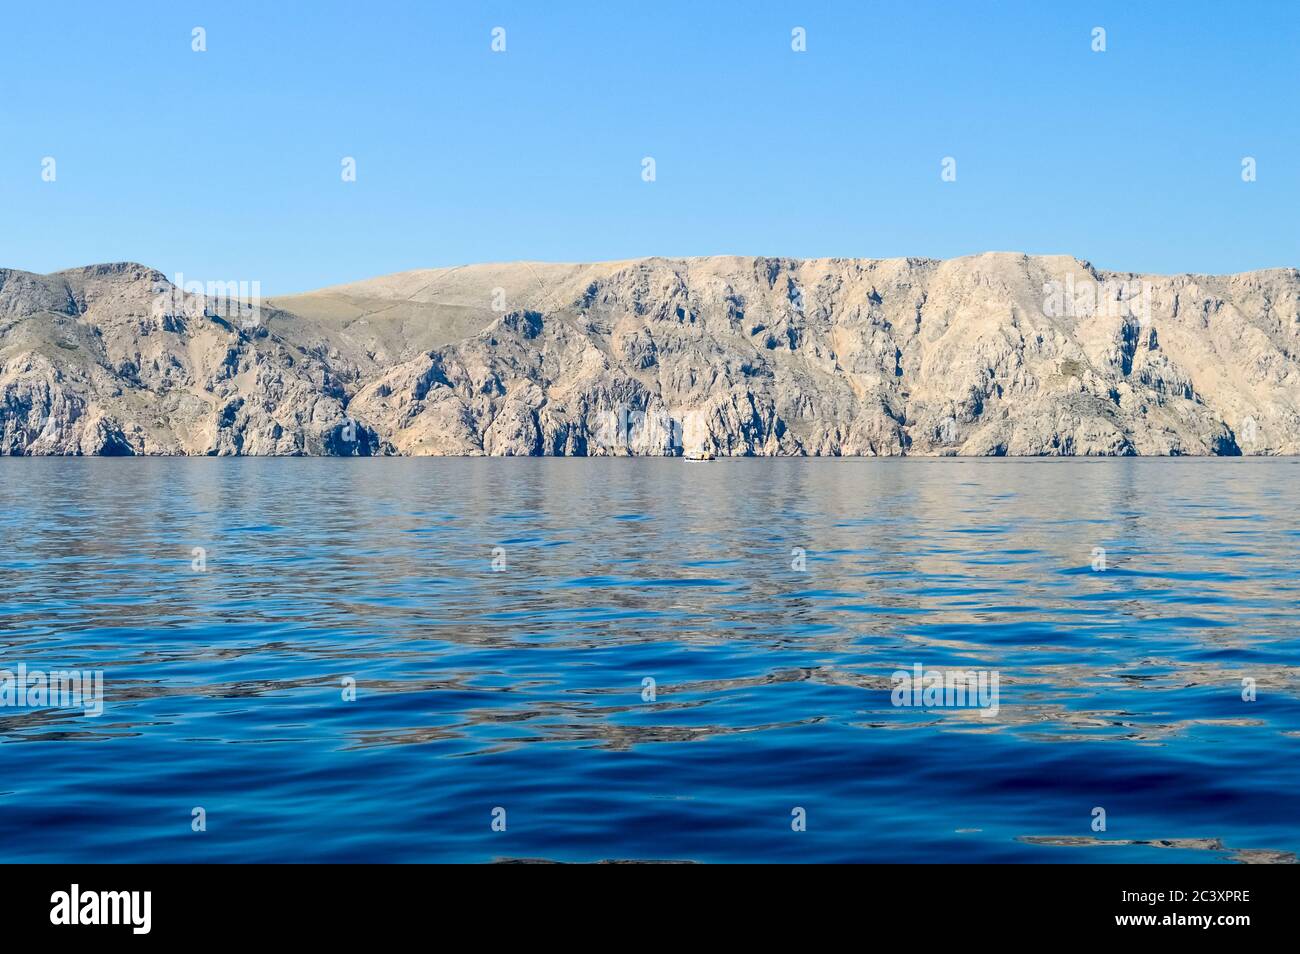 Barren rocks in the rippling sea with clear blue sky Stock Photo